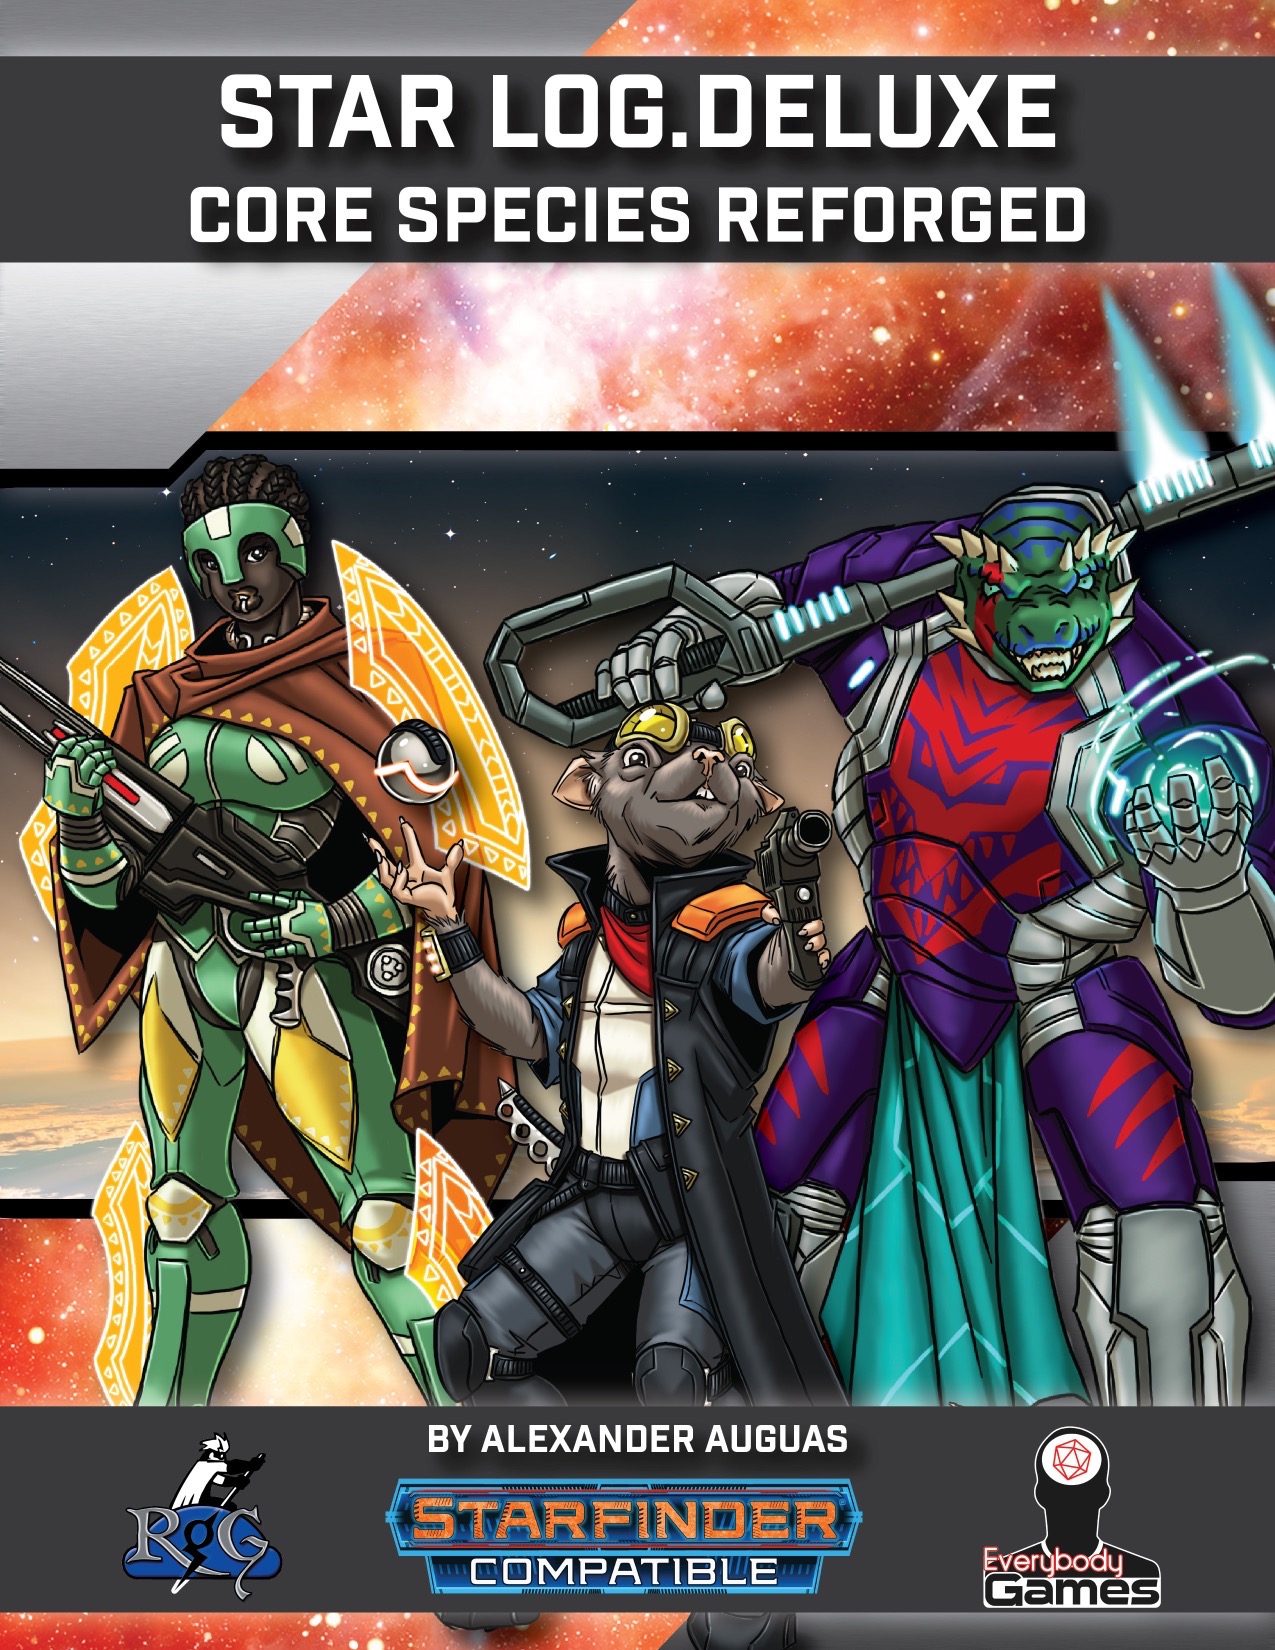 paizo-star-log-deluxe-core-species-reforged-sfrpg-pdf